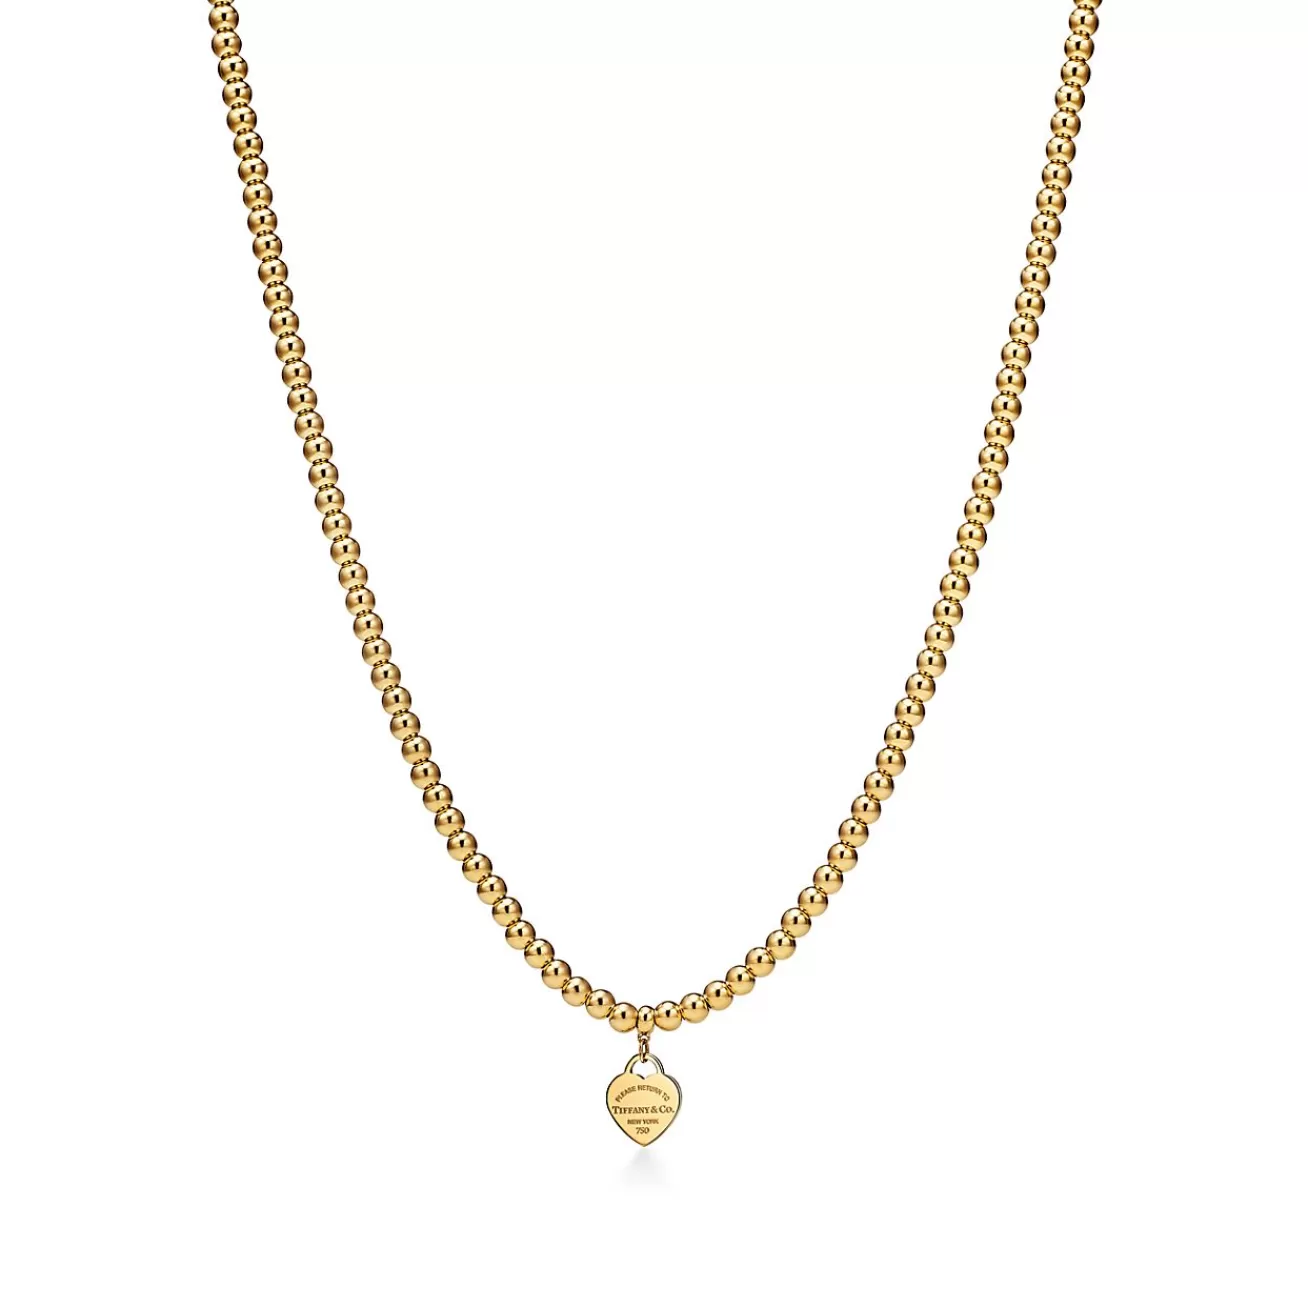 Tiffany & Co. Return to Tiffany® Heart Tag Bead Necklace in Yellow Gold, Mini | ^ Necklaces & Pendants | Gold Jewelry